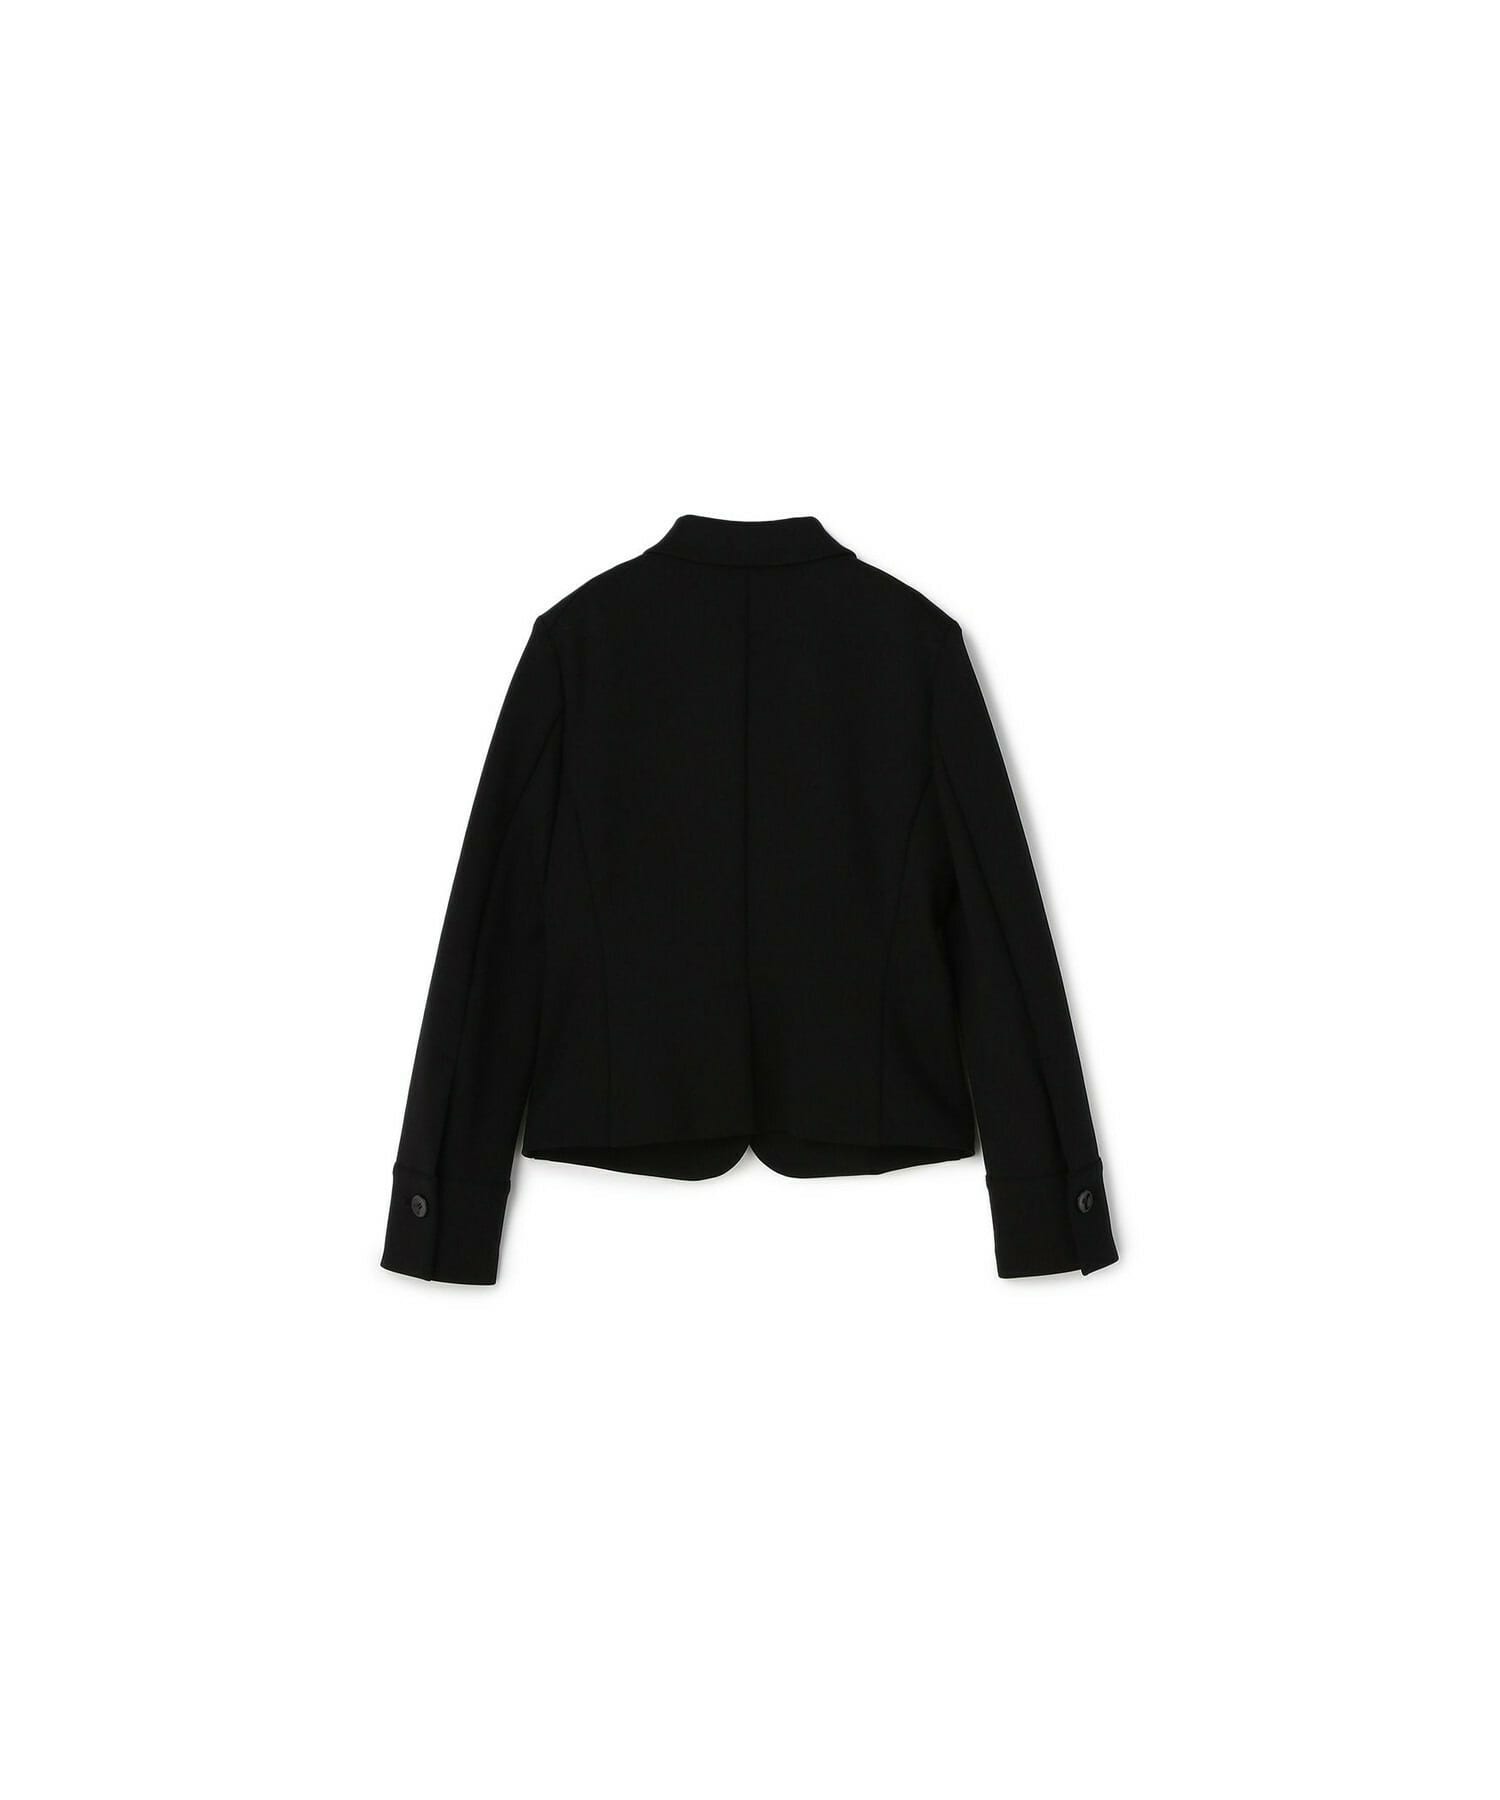 【yoshie inaba】RECYCLE NYLON SCUBA FITTED SHIRT JACKET 詳細画像 ブラック 7